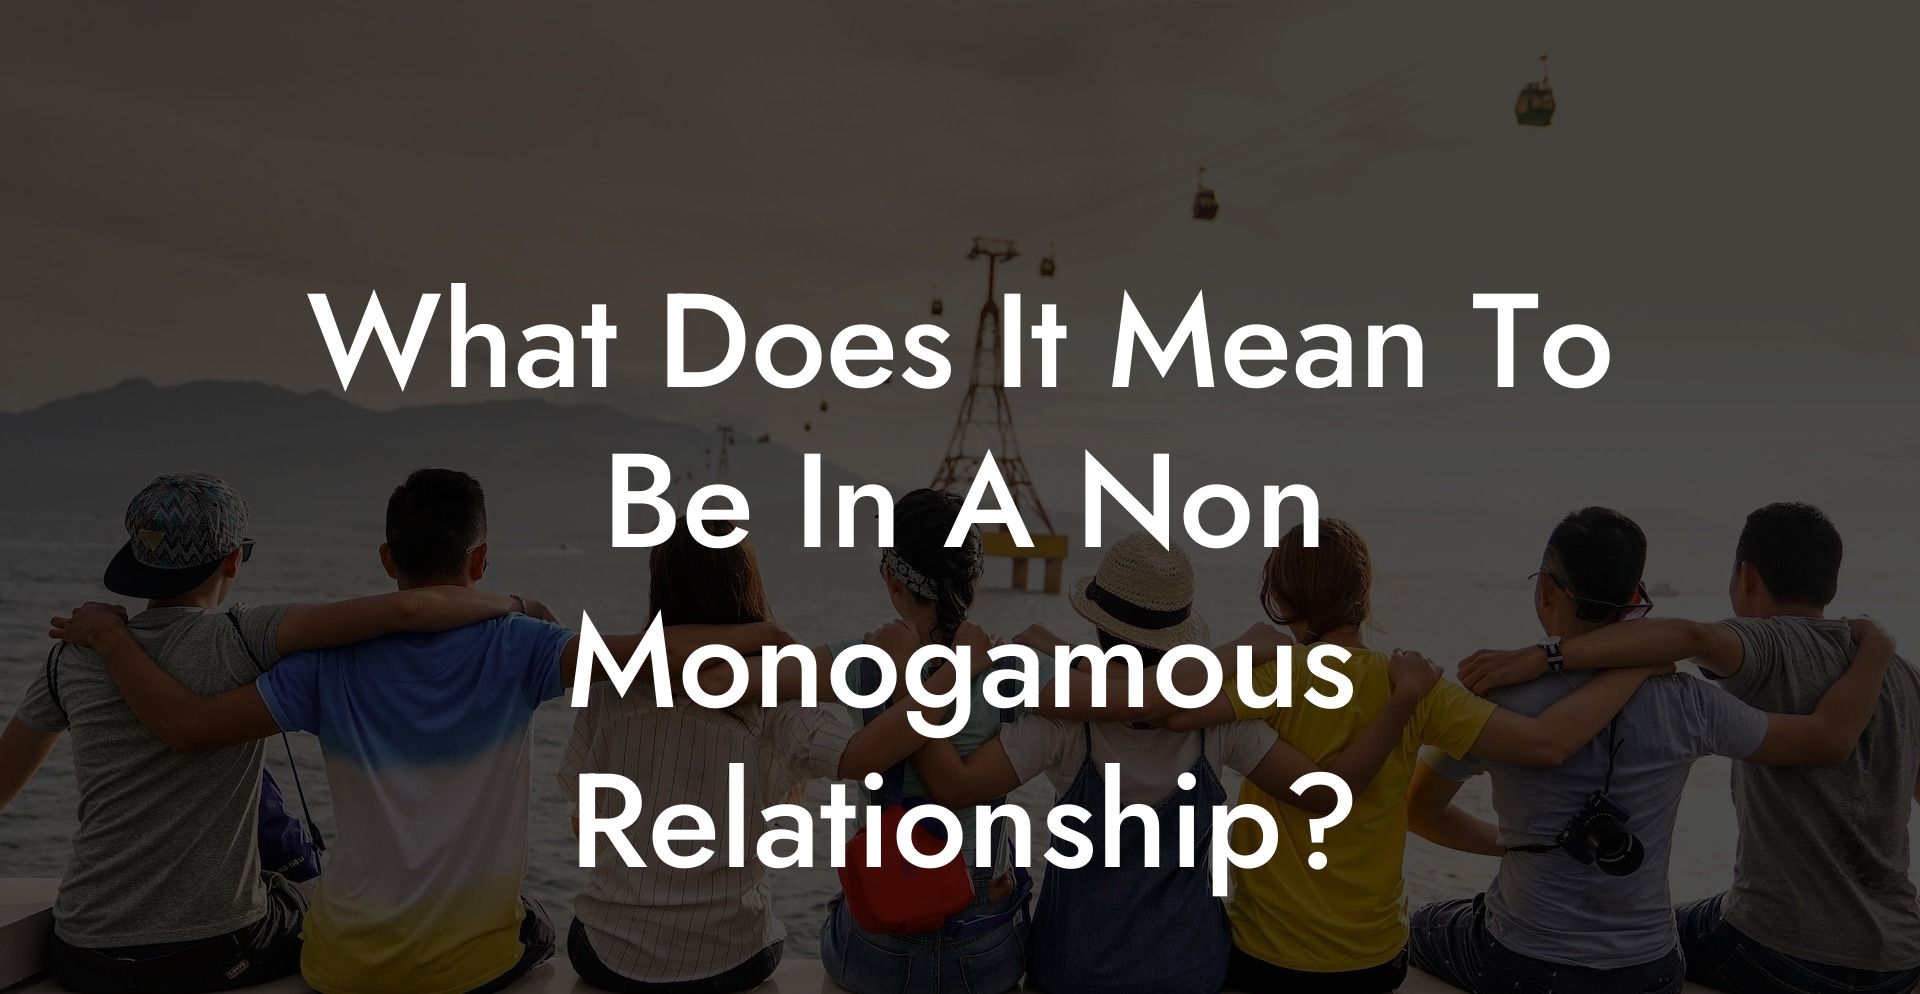 What Does It Mean To Be In A Non Monogamous Relationship?